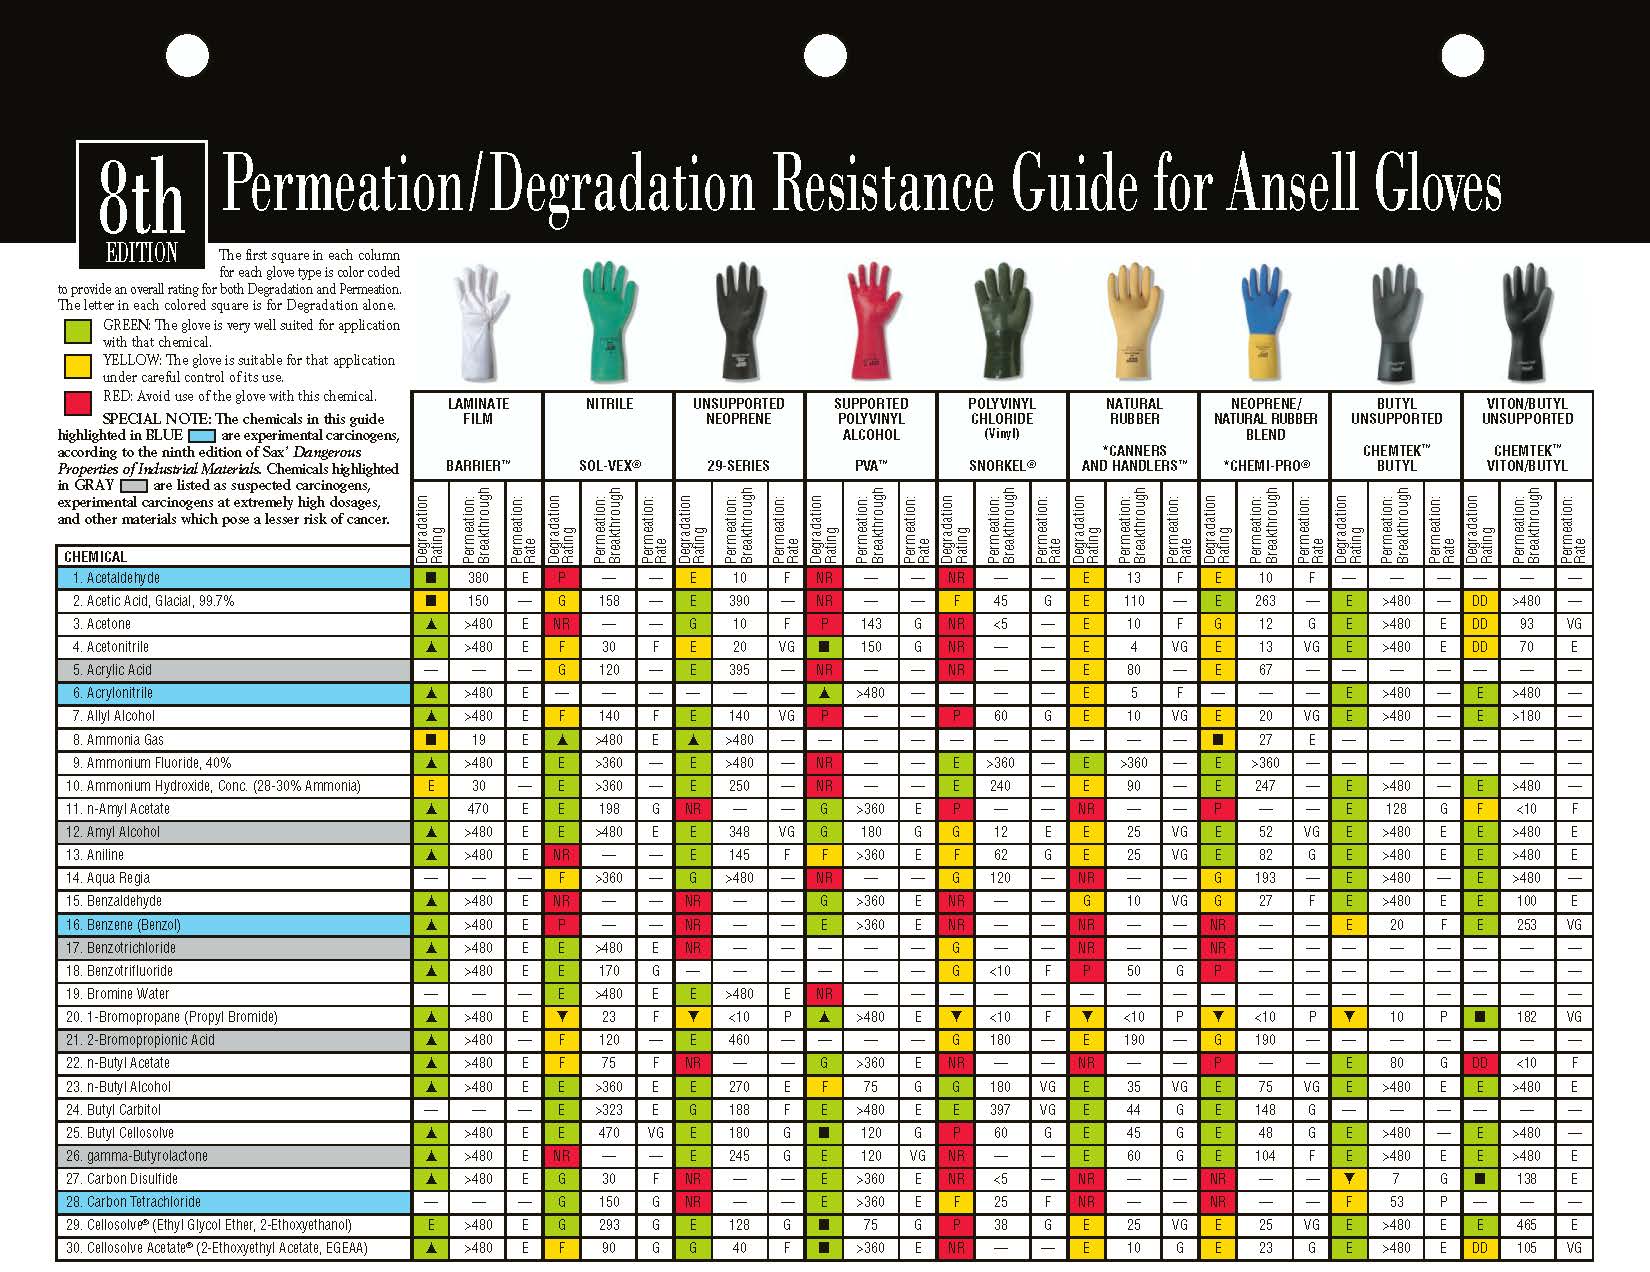 Chemical Resistant Gloves Chart